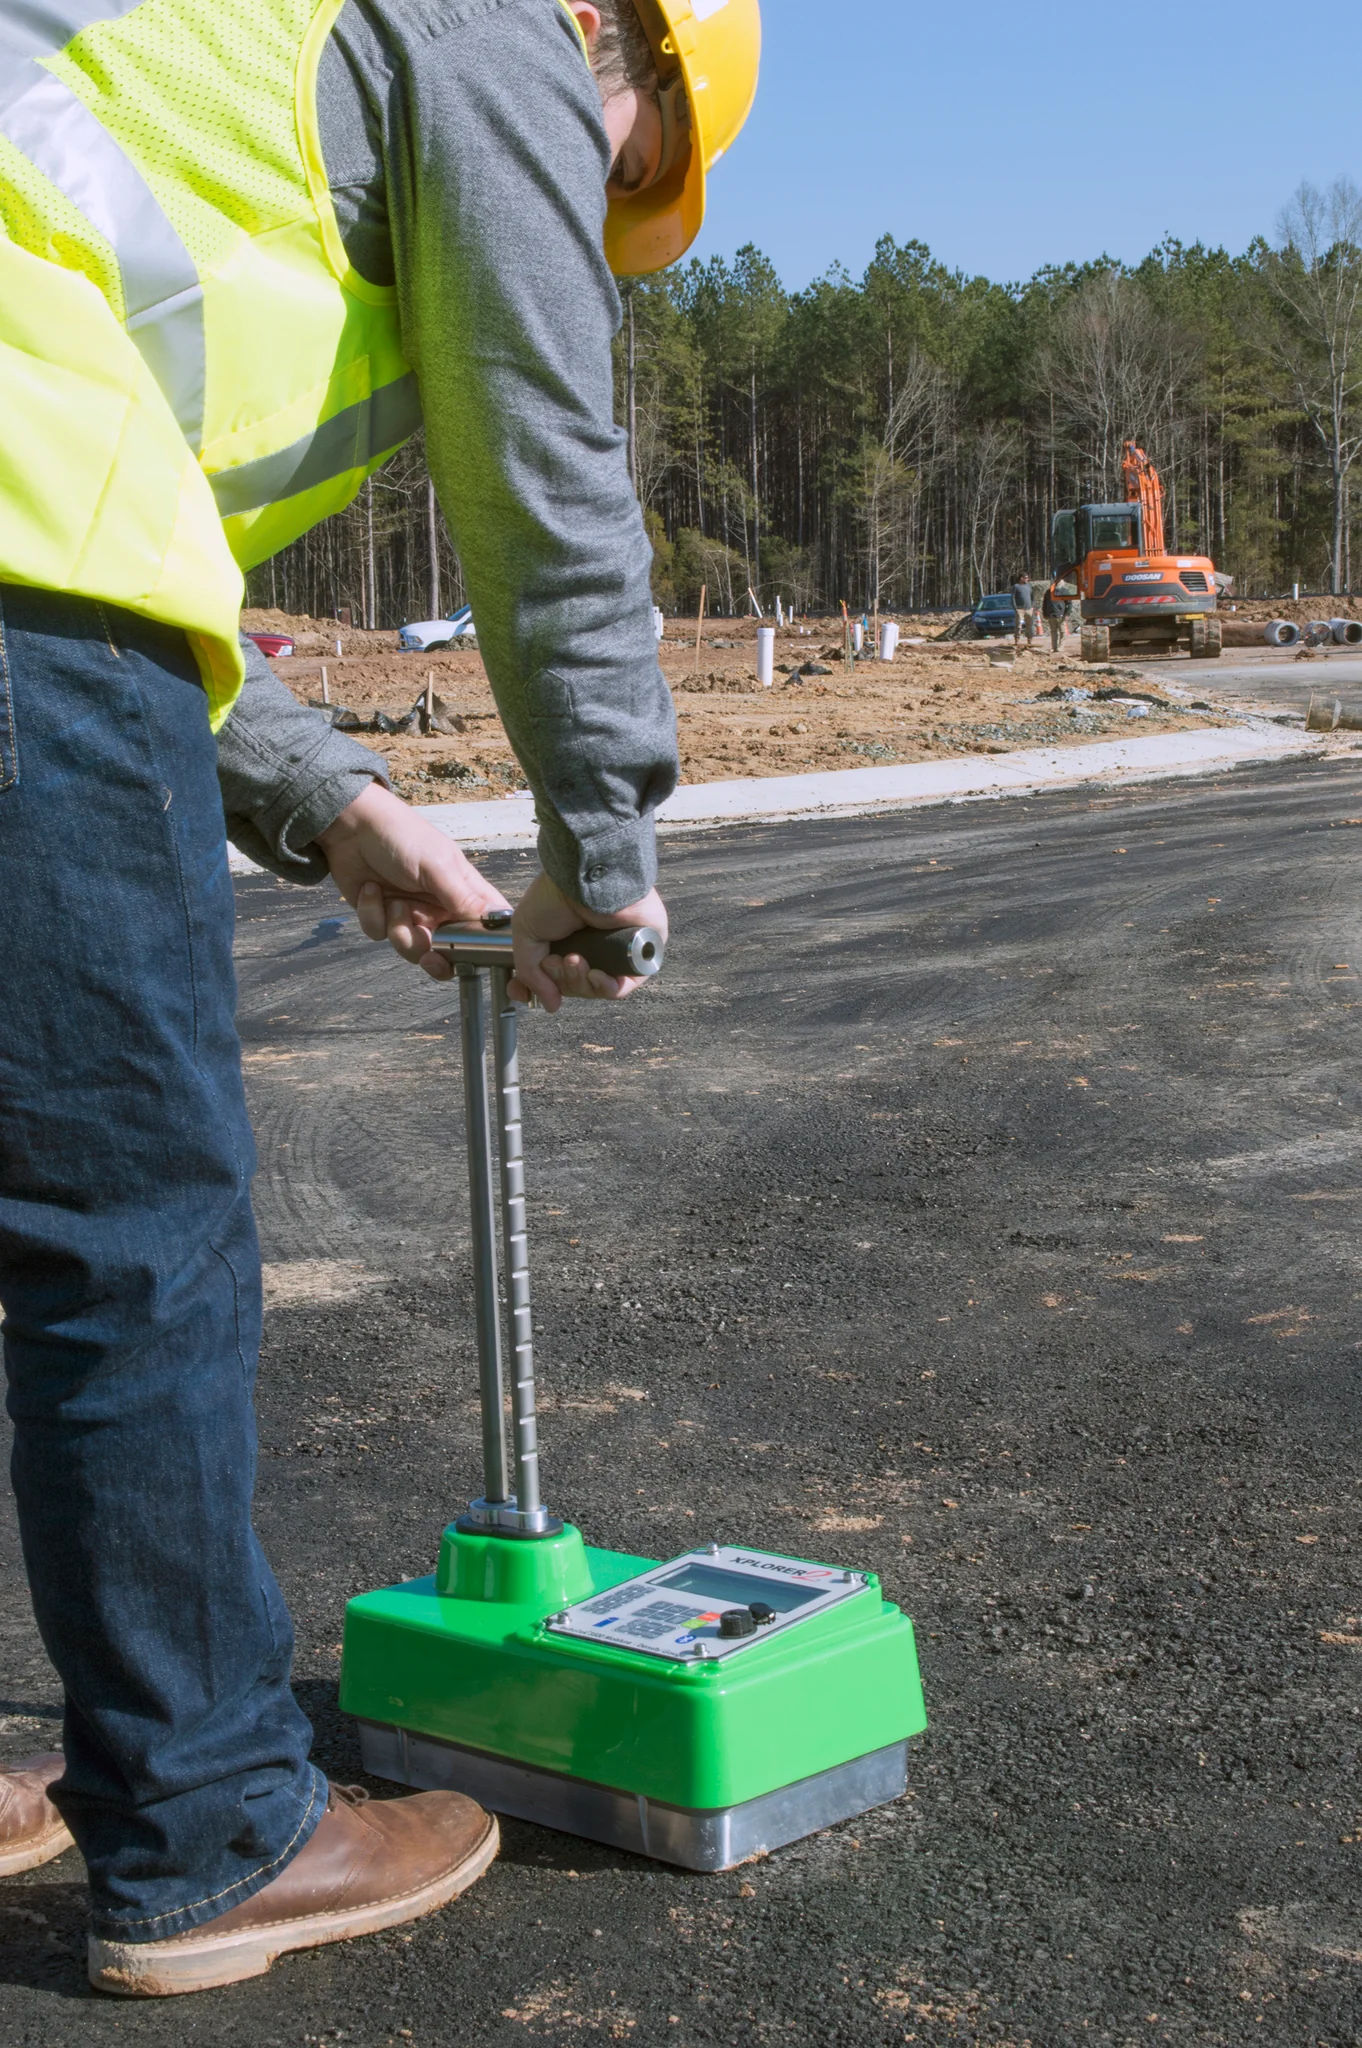 Nuclear density gauge in use on construction site